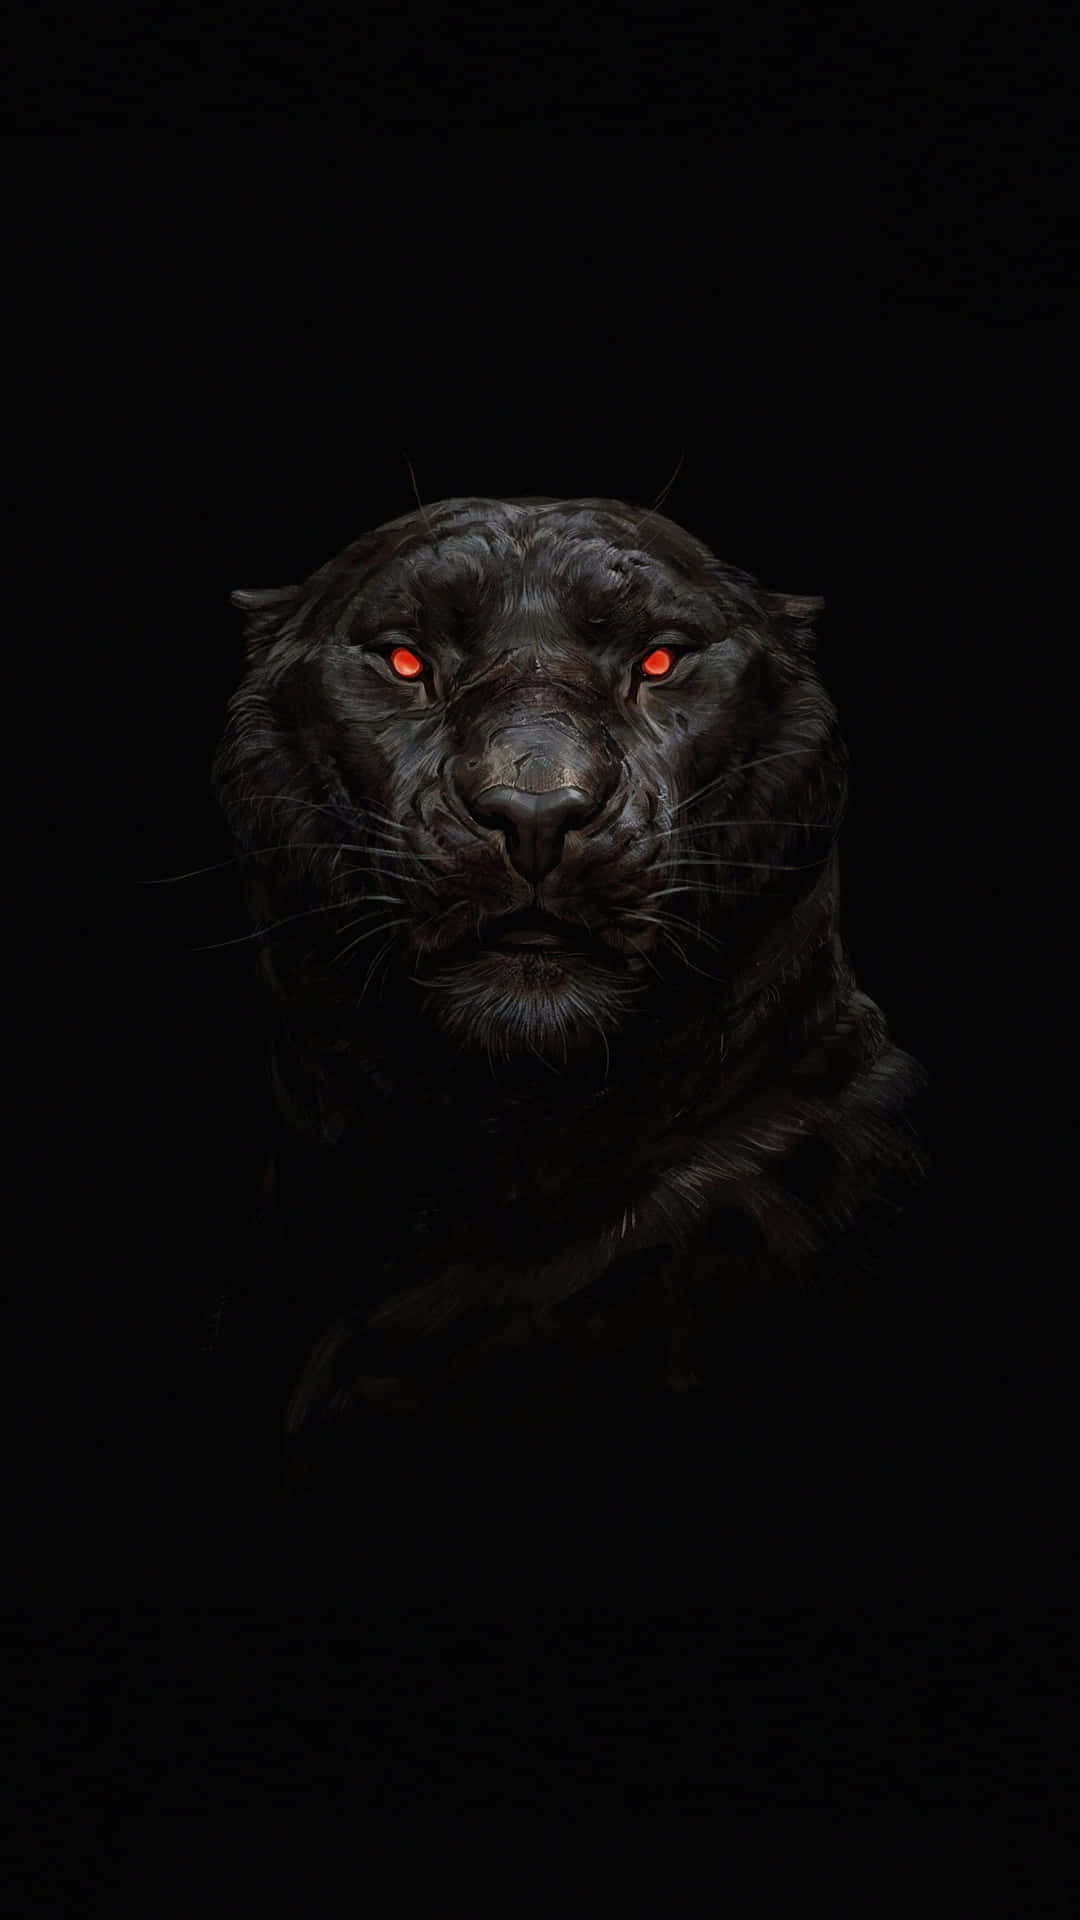 A Black Leopard With Red Eyes On A Dark Background Wallpaper